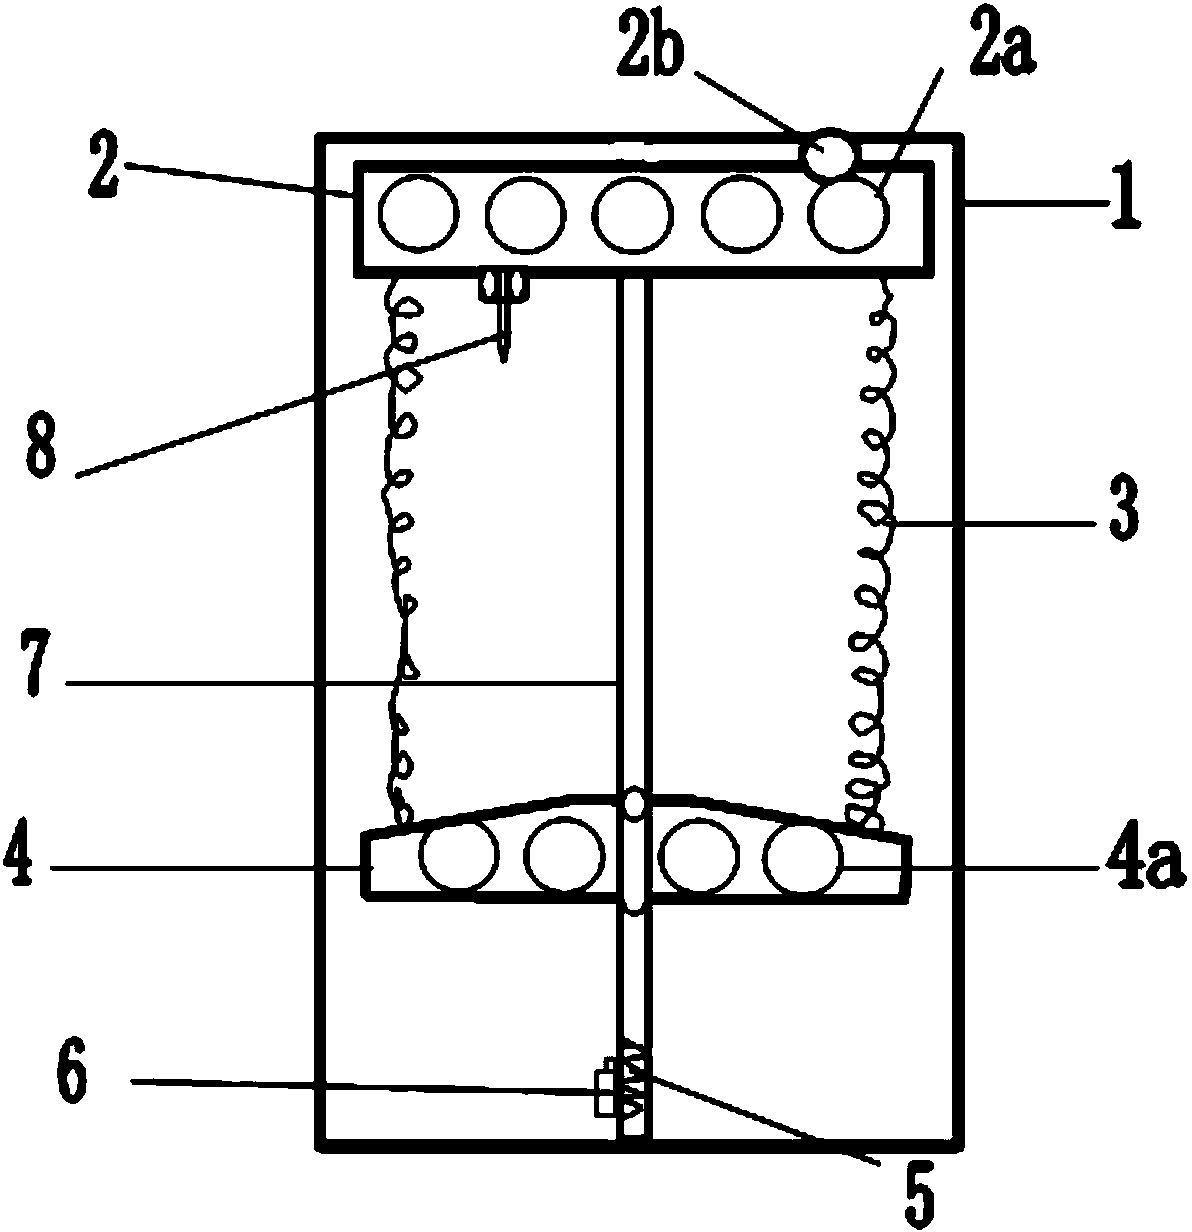 Constant-tension cloth containing device